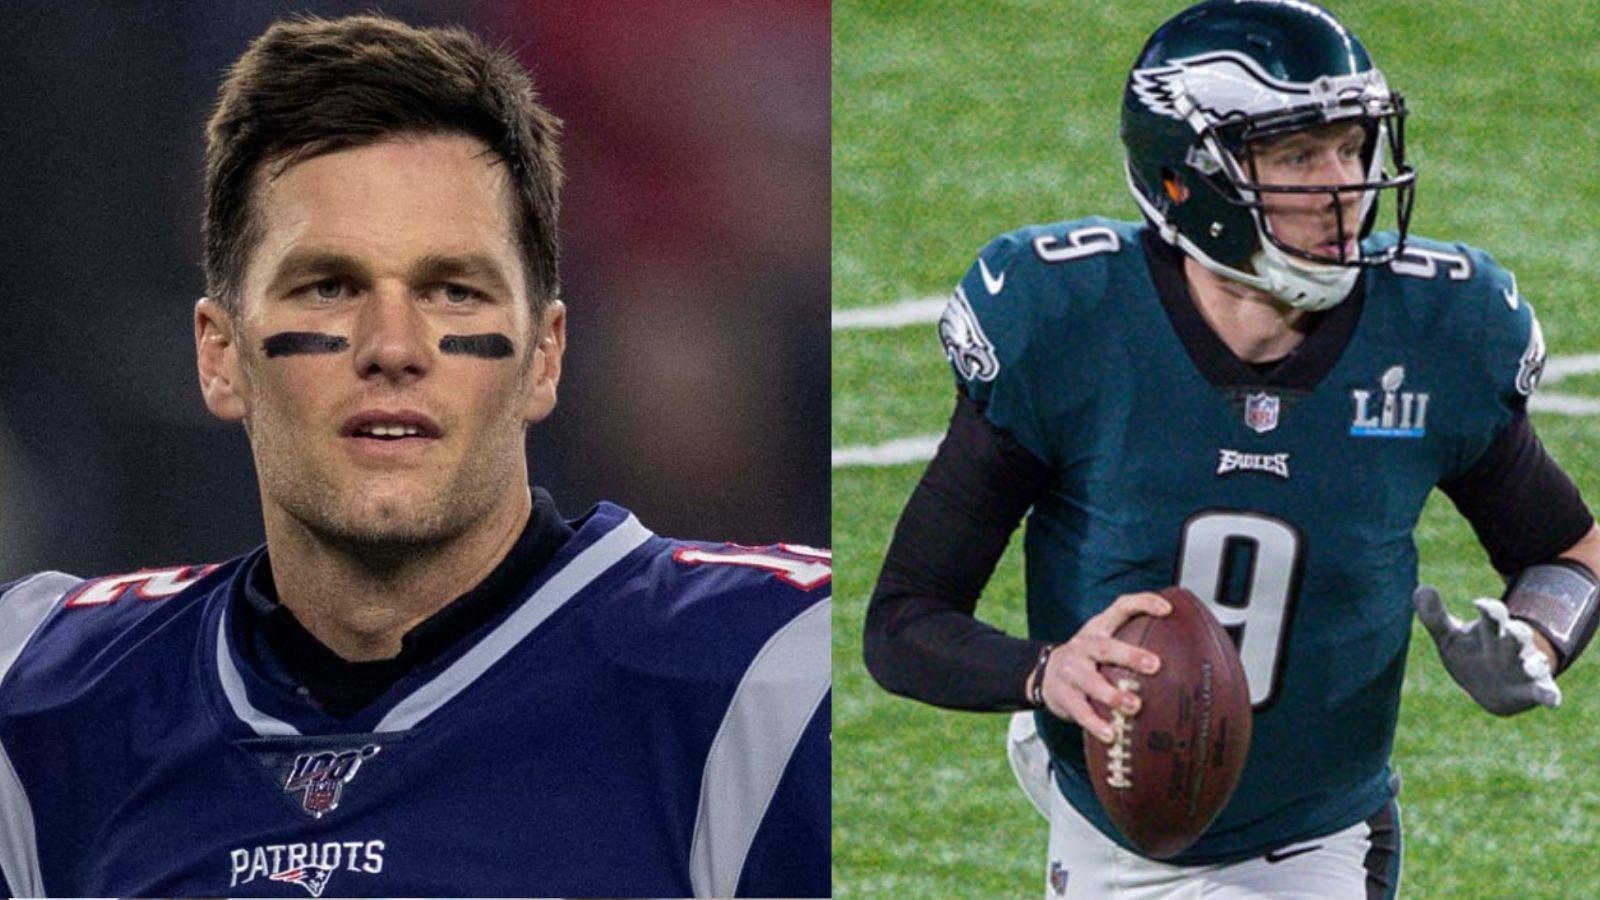 Tom Brady as a member of the New England Patriots (left) and Nick Foles as a member of the Philadelpia Eagles (right).